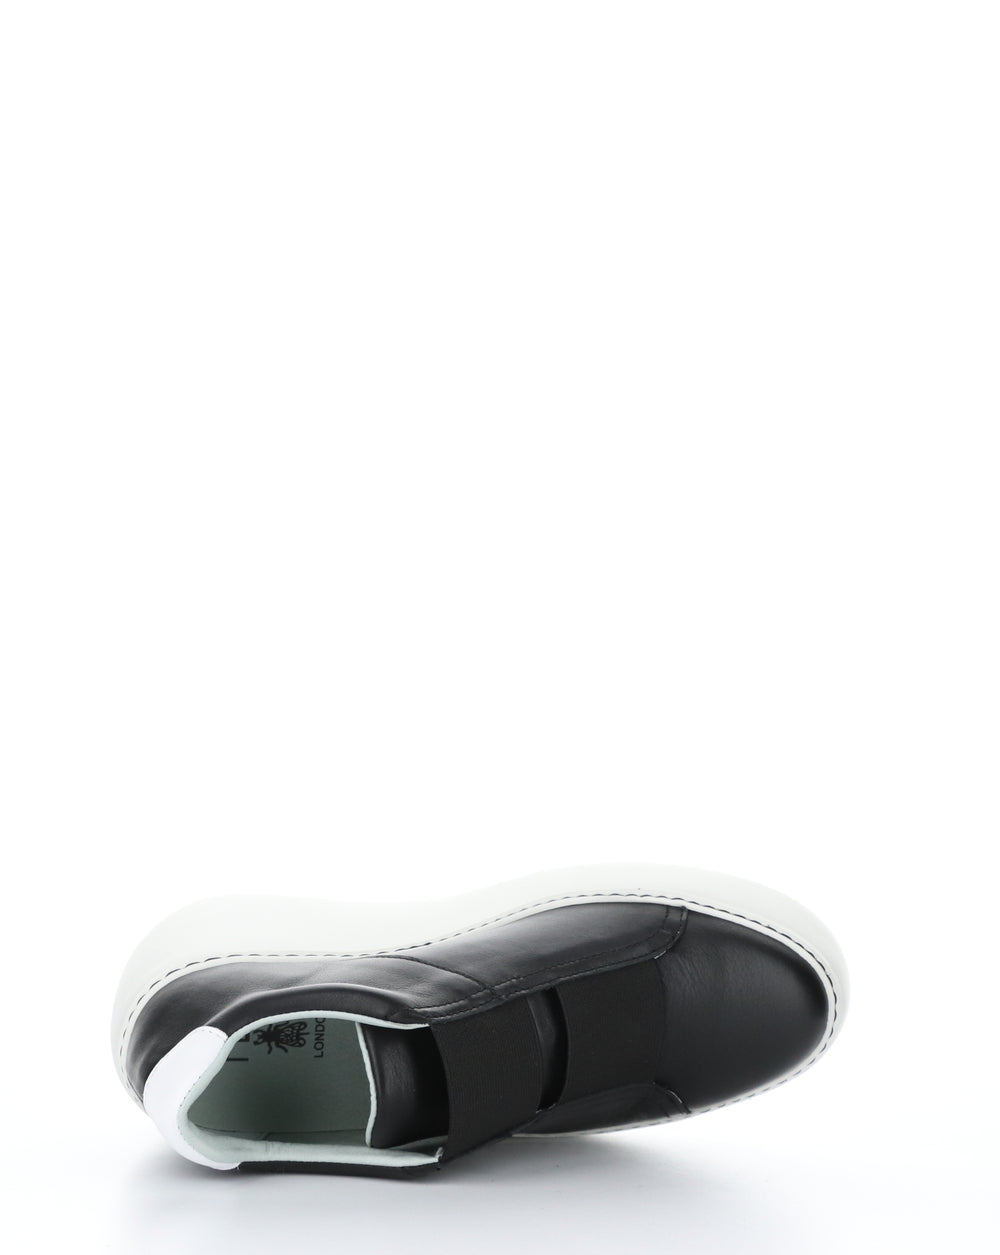 DITO581FLY 000 BLACK Elasticated Shoes